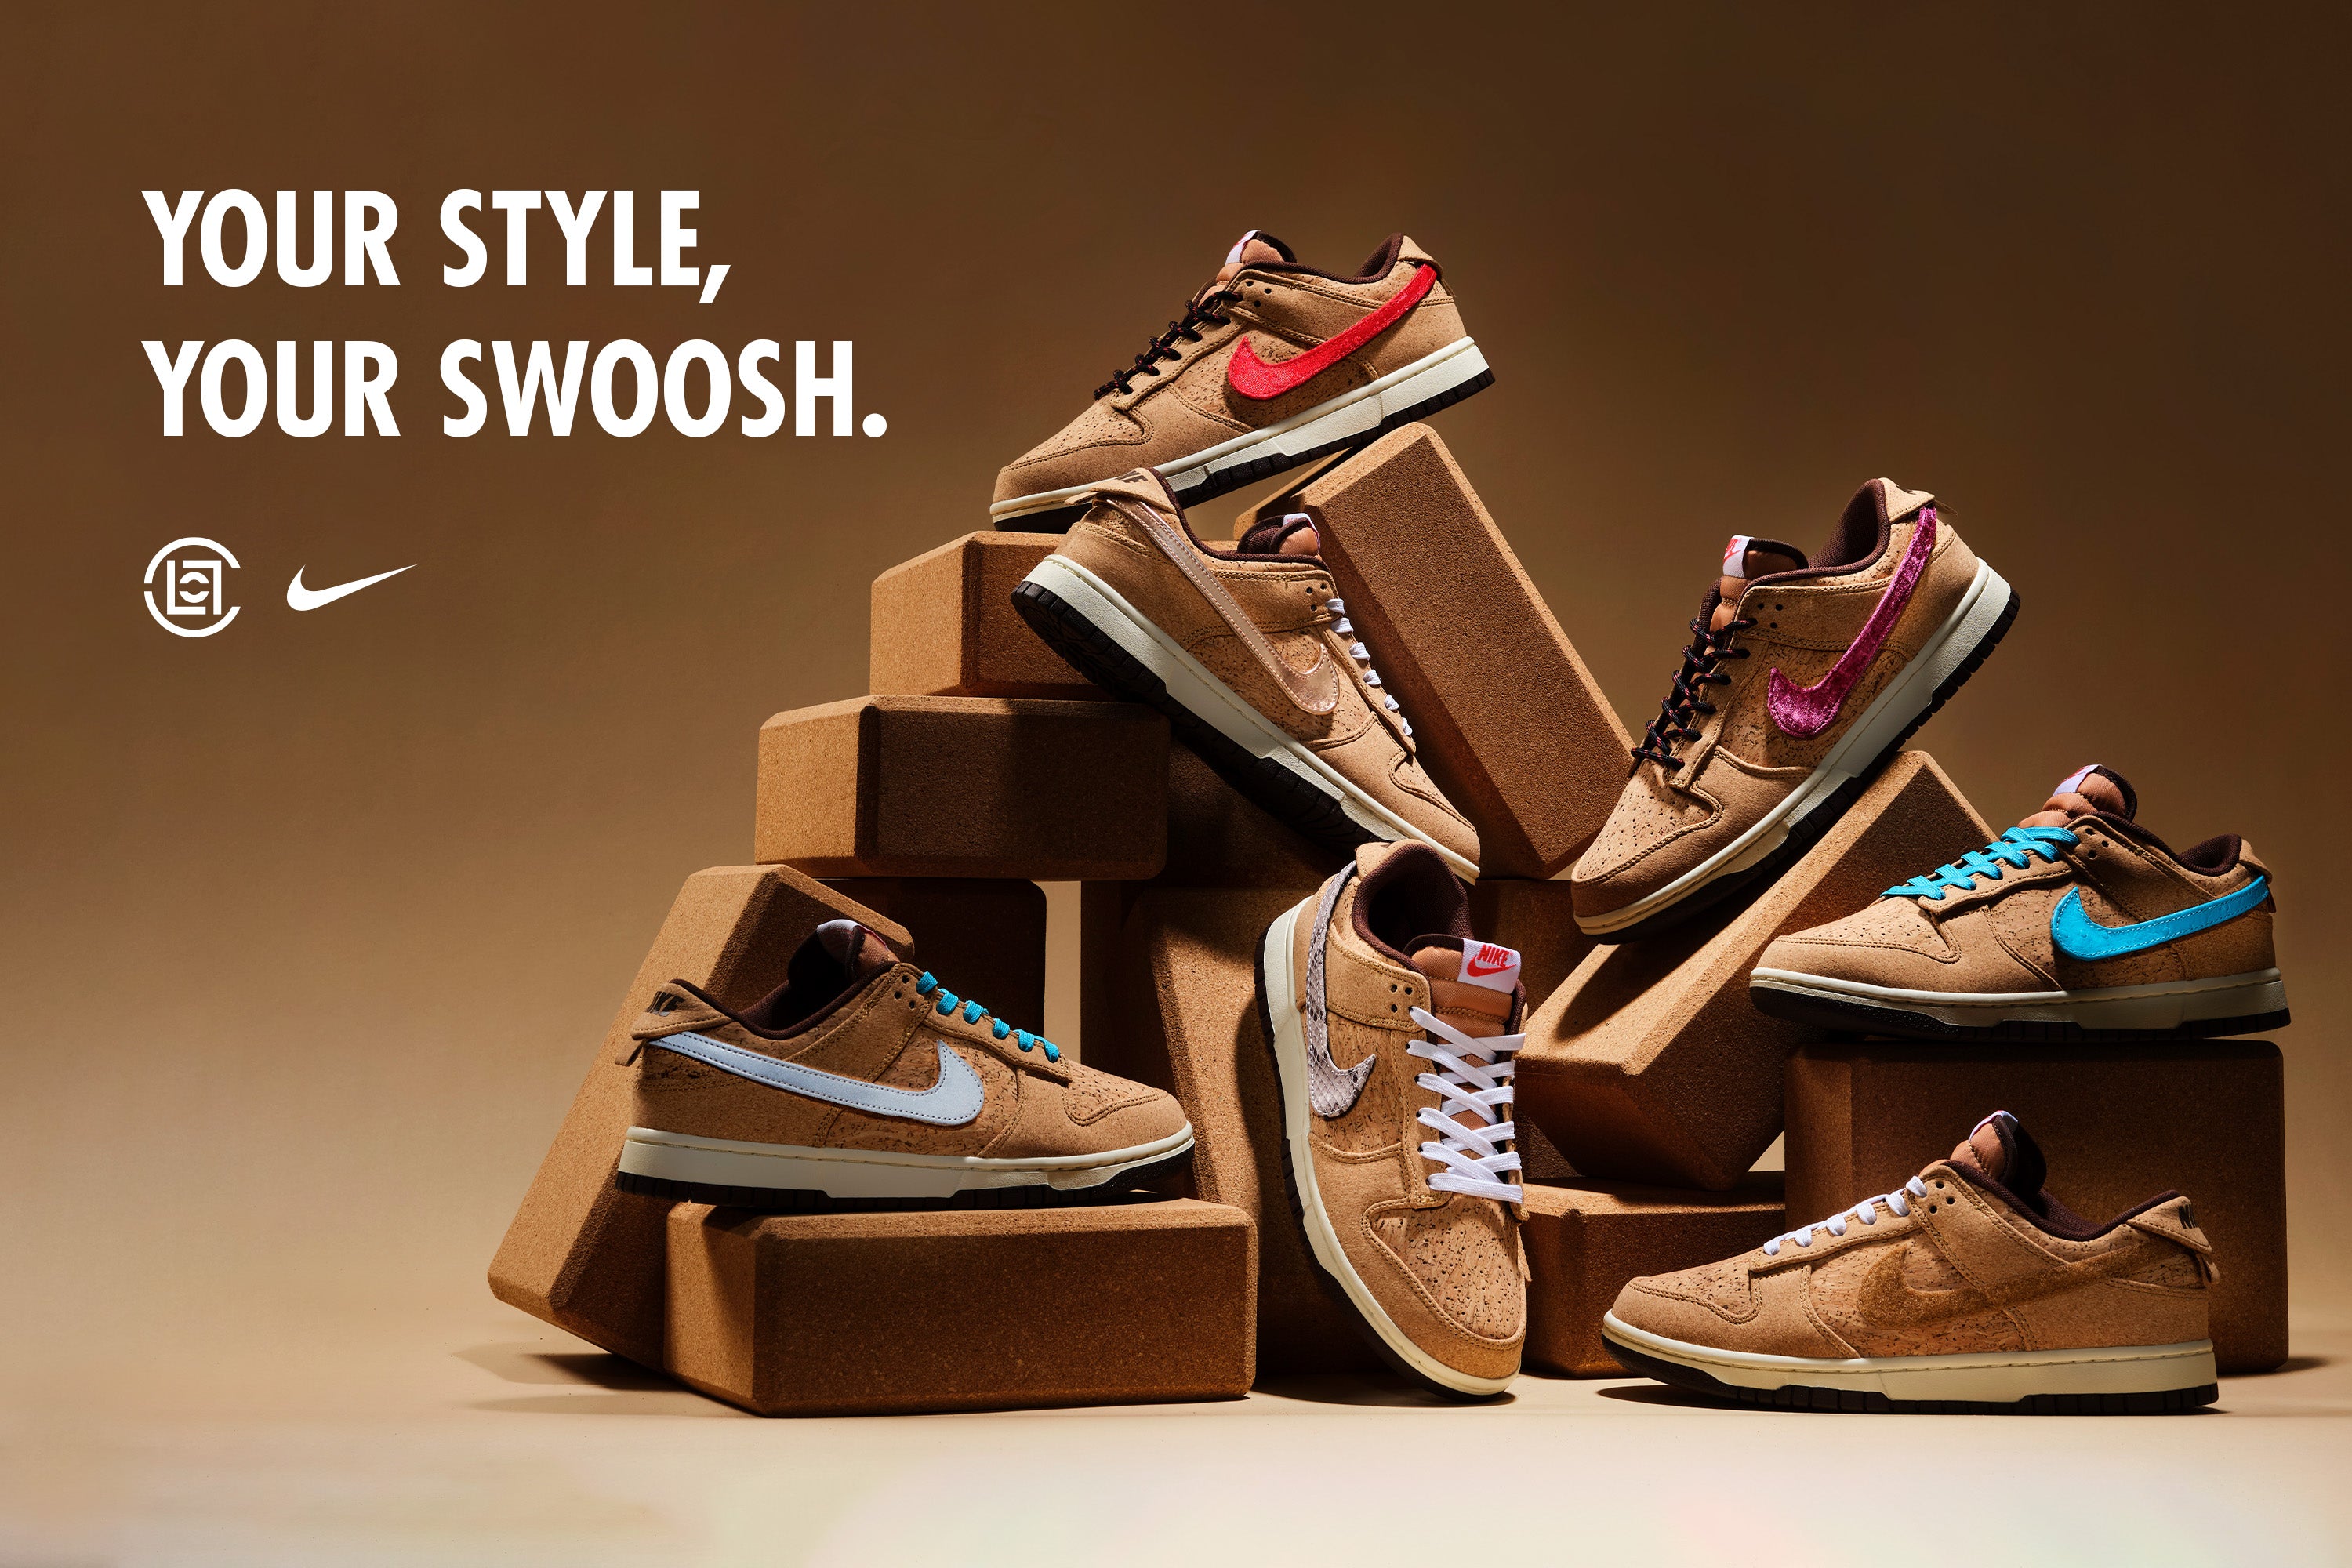 YOUR STYLE, YOUR SWOOSH: CLOT INVITES CUSTOMIZATION AND SELF